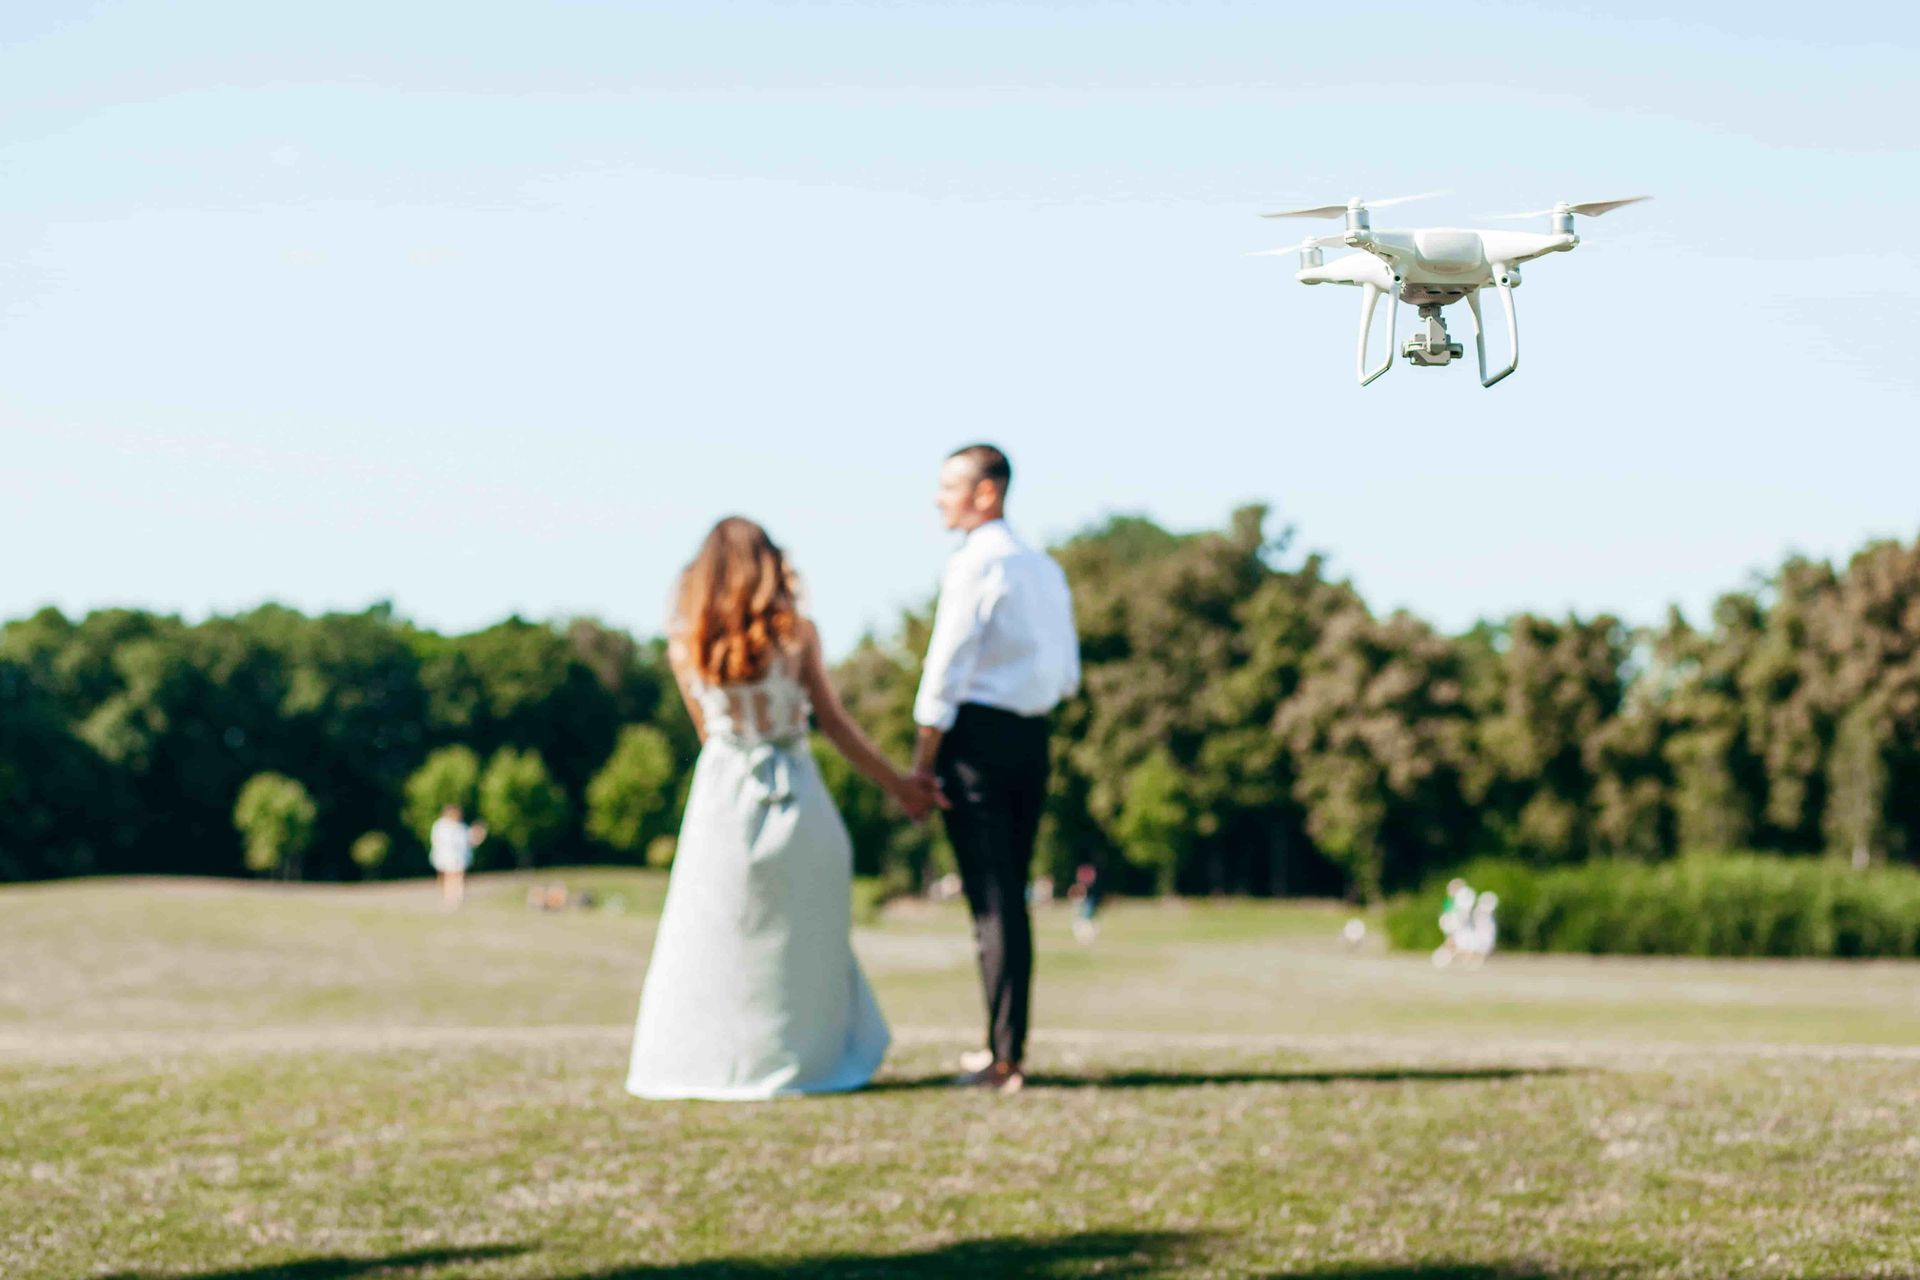 Drone photography at a wedding